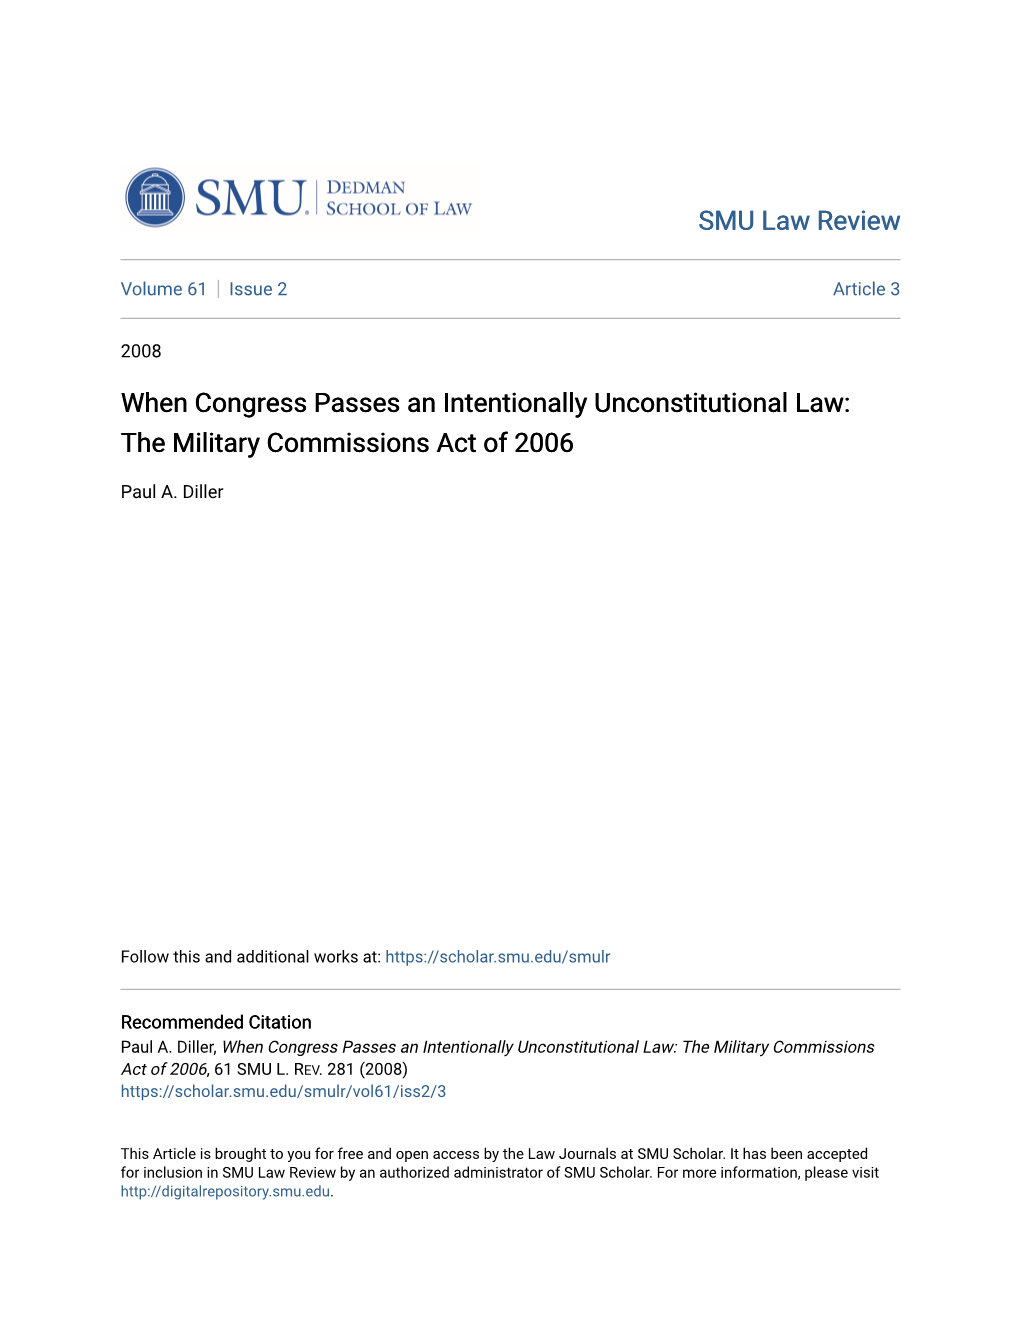 When Congress Passes an Intentionally Unconstitutional Law: the Military Commissions Act of 2006